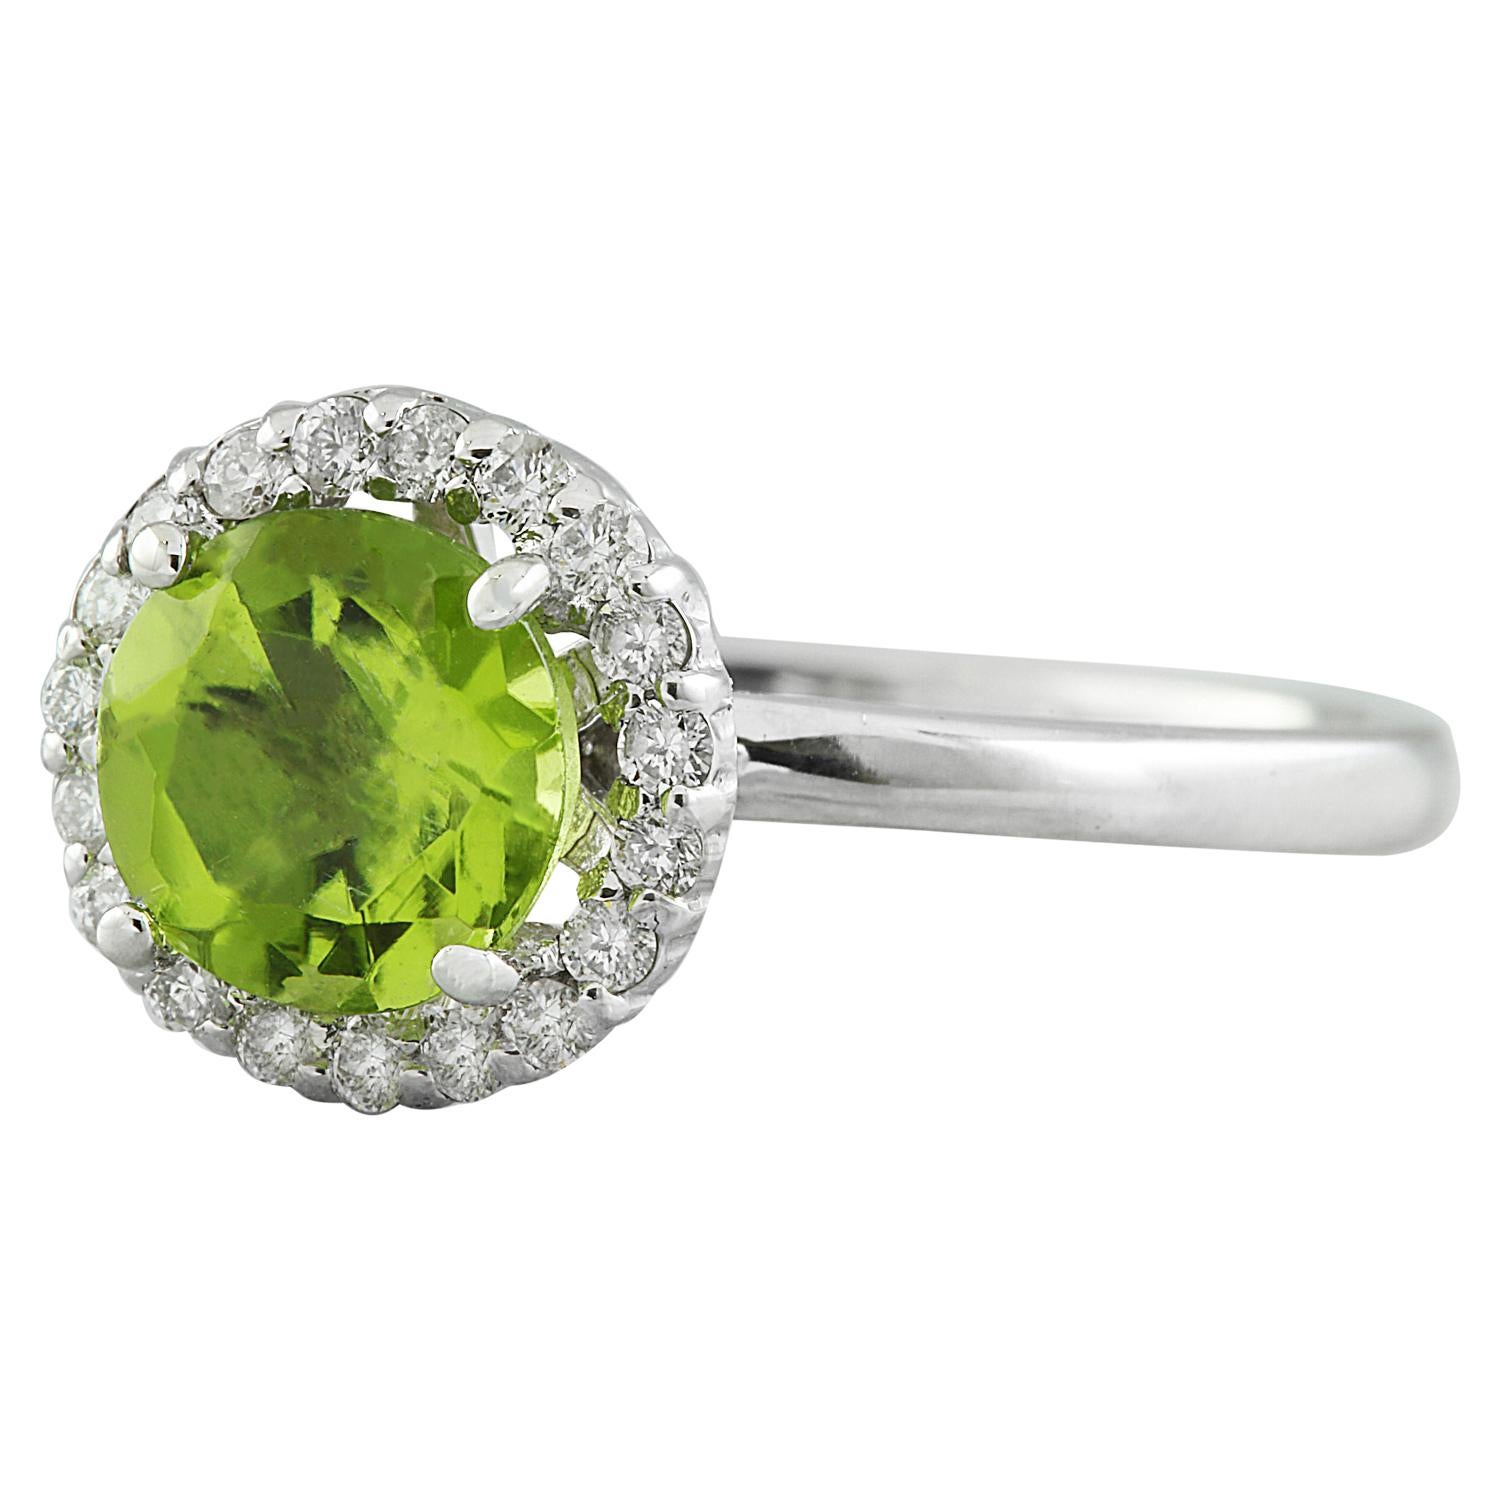 Elevate your style with our elegant 1.69 Carat Natural Peridot Ring, exquisitely crafted in solid 14K White Gold. This enchanting piece features a vibrant peridot gemstone weighing 1.49 carats, measuring 7.00x7.00 millimeters, showcasing its vivid